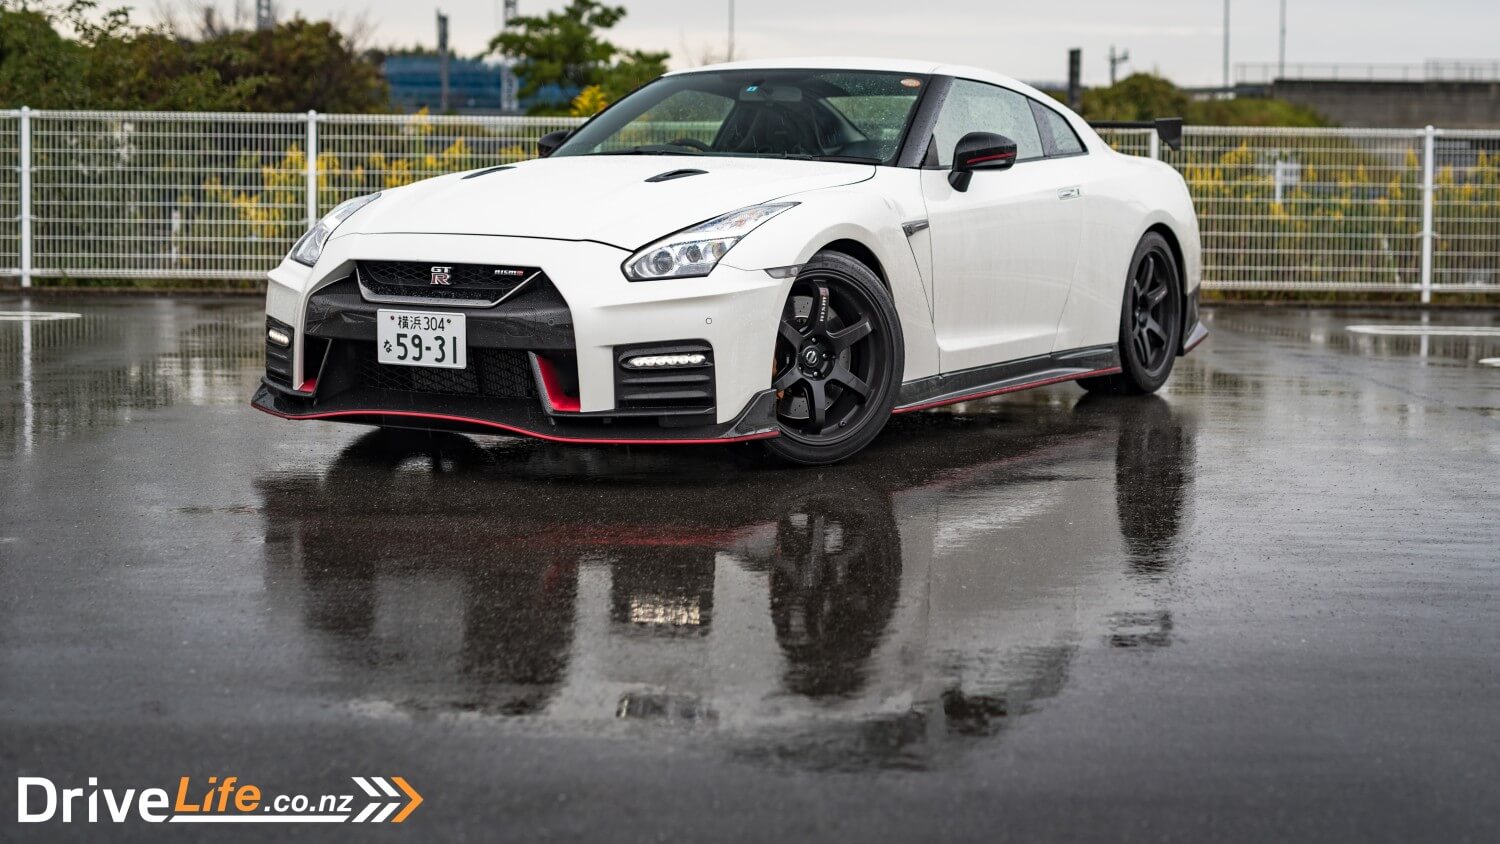 17 Nissan Gt R Nismo Car Review The Most Exclusive Way To Lose Your License Drivelife